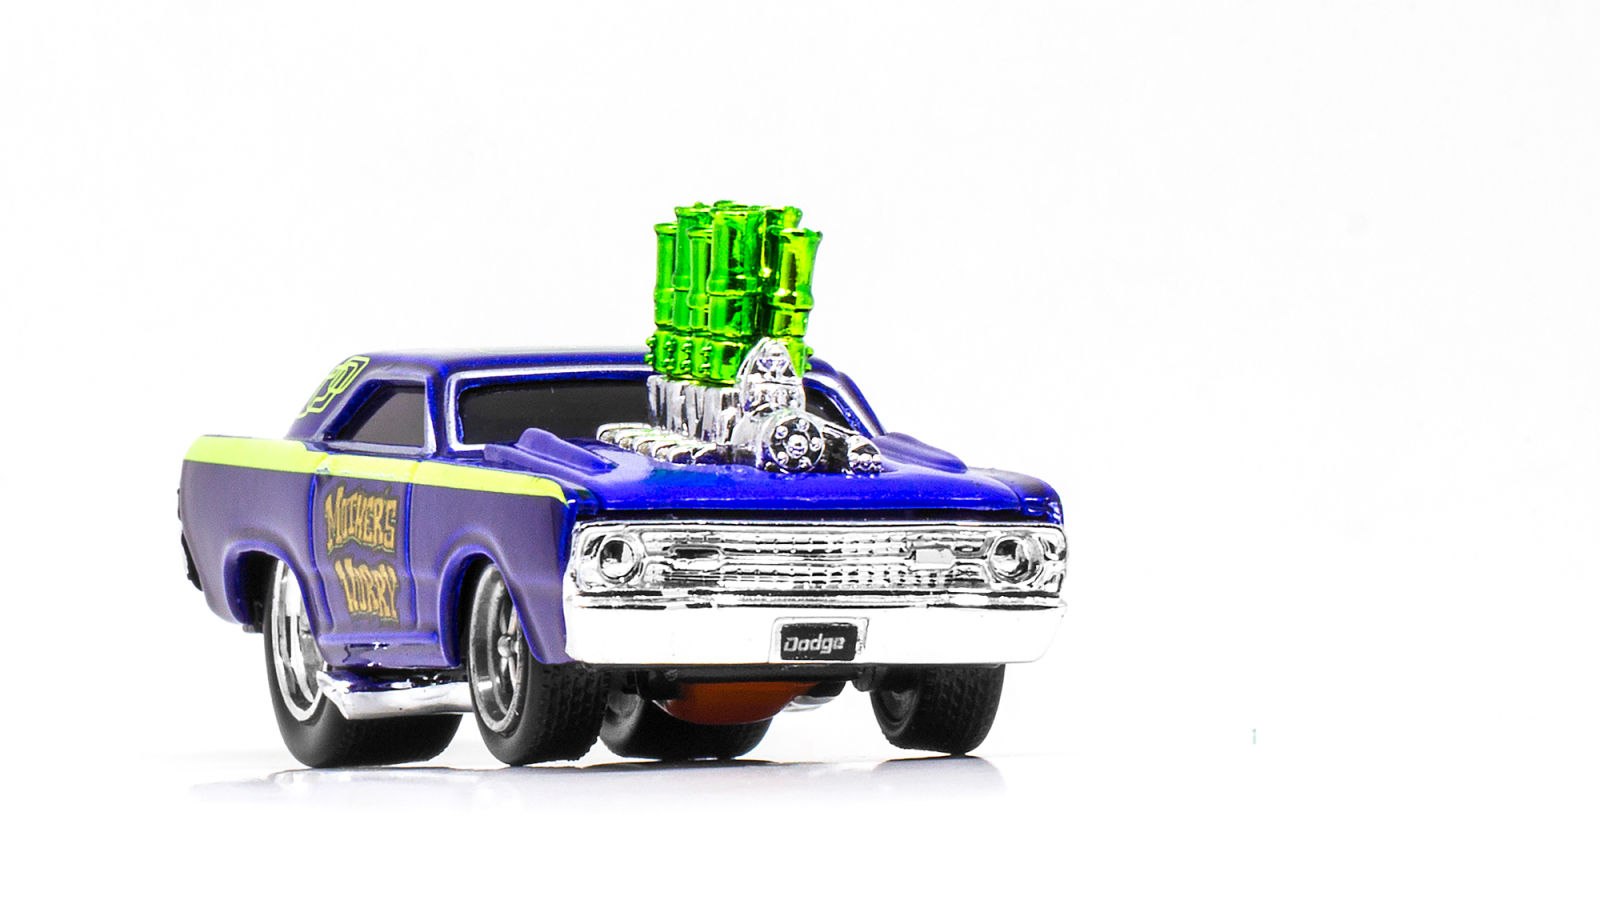 Illustration for article titled Mopar Monday: Mothers Worry